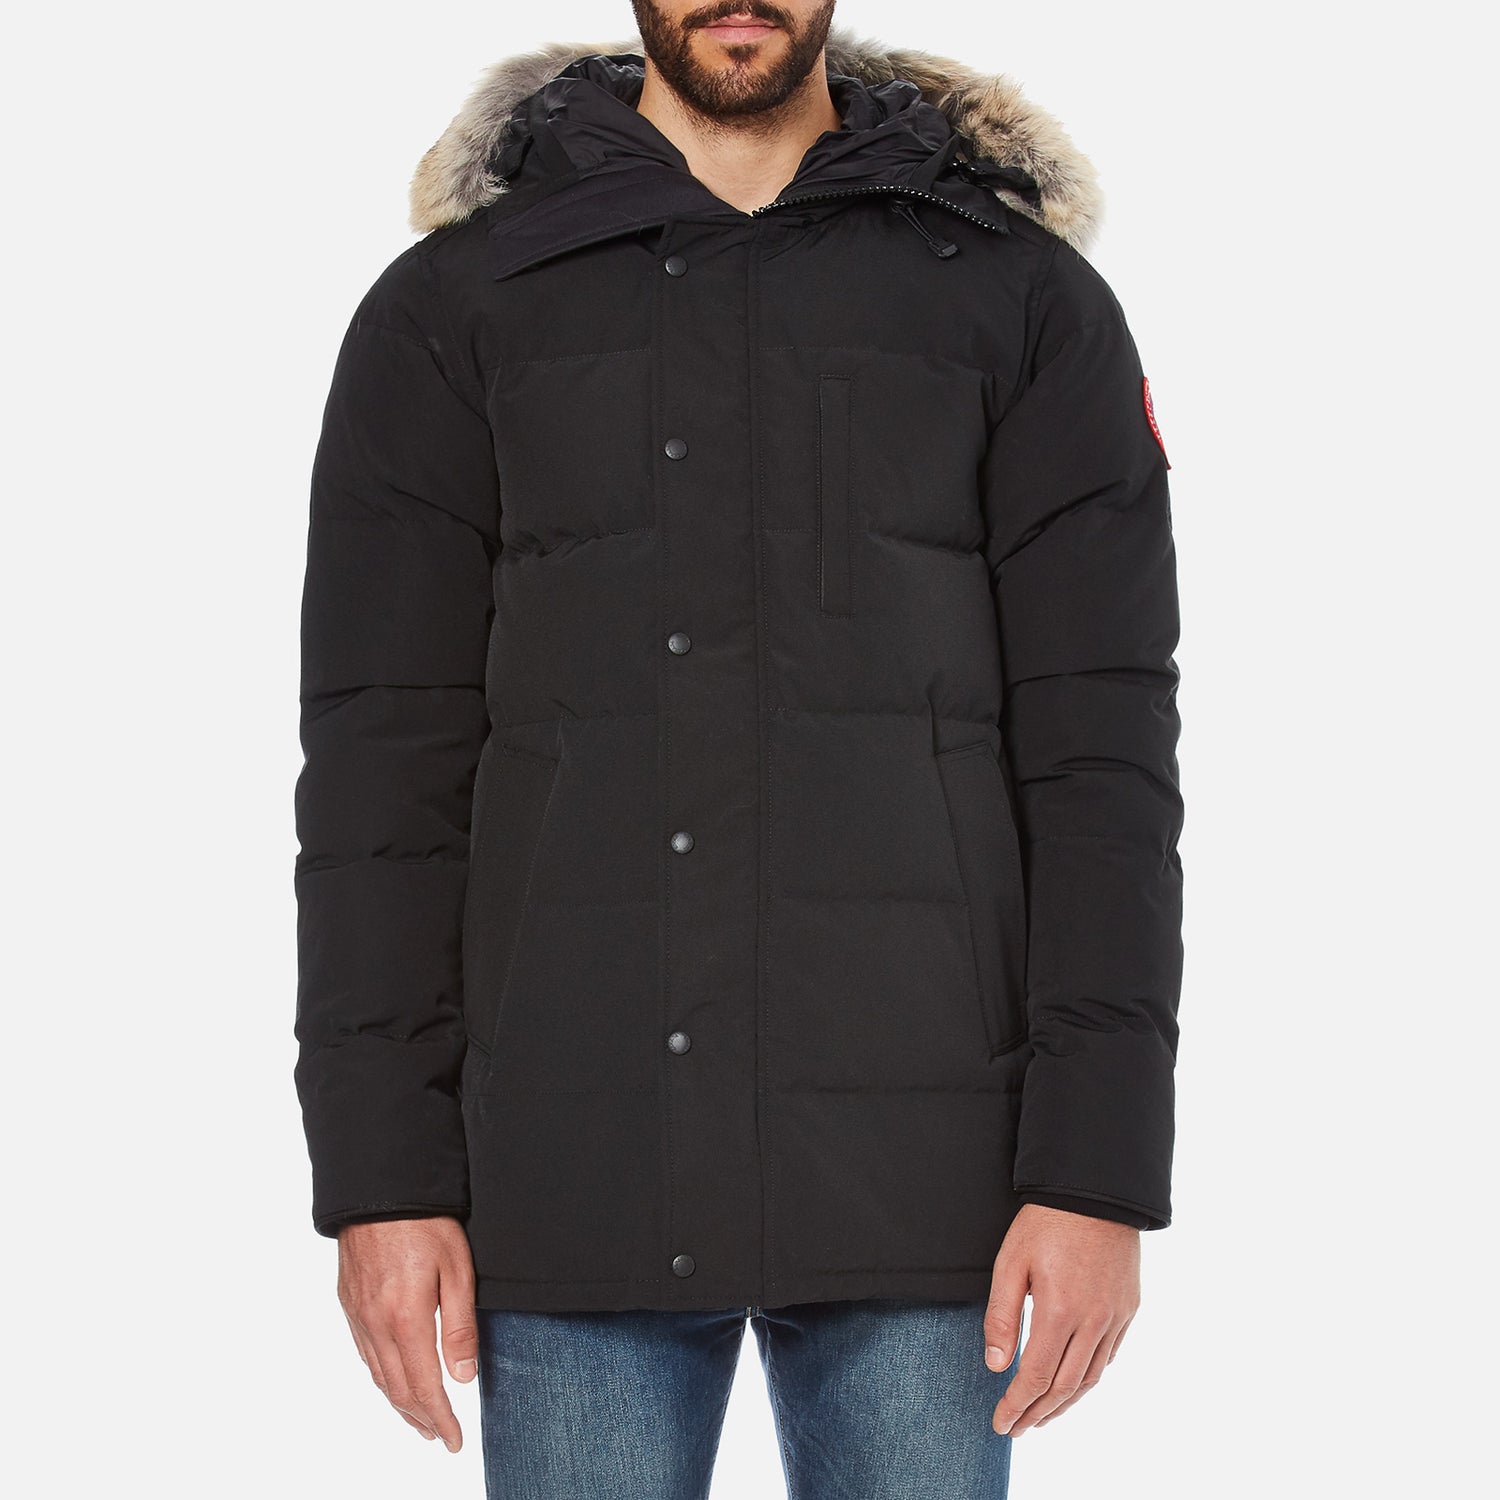 Canada Goose Men's Carson Parka Jacket - Black - Free UK Delivery Available